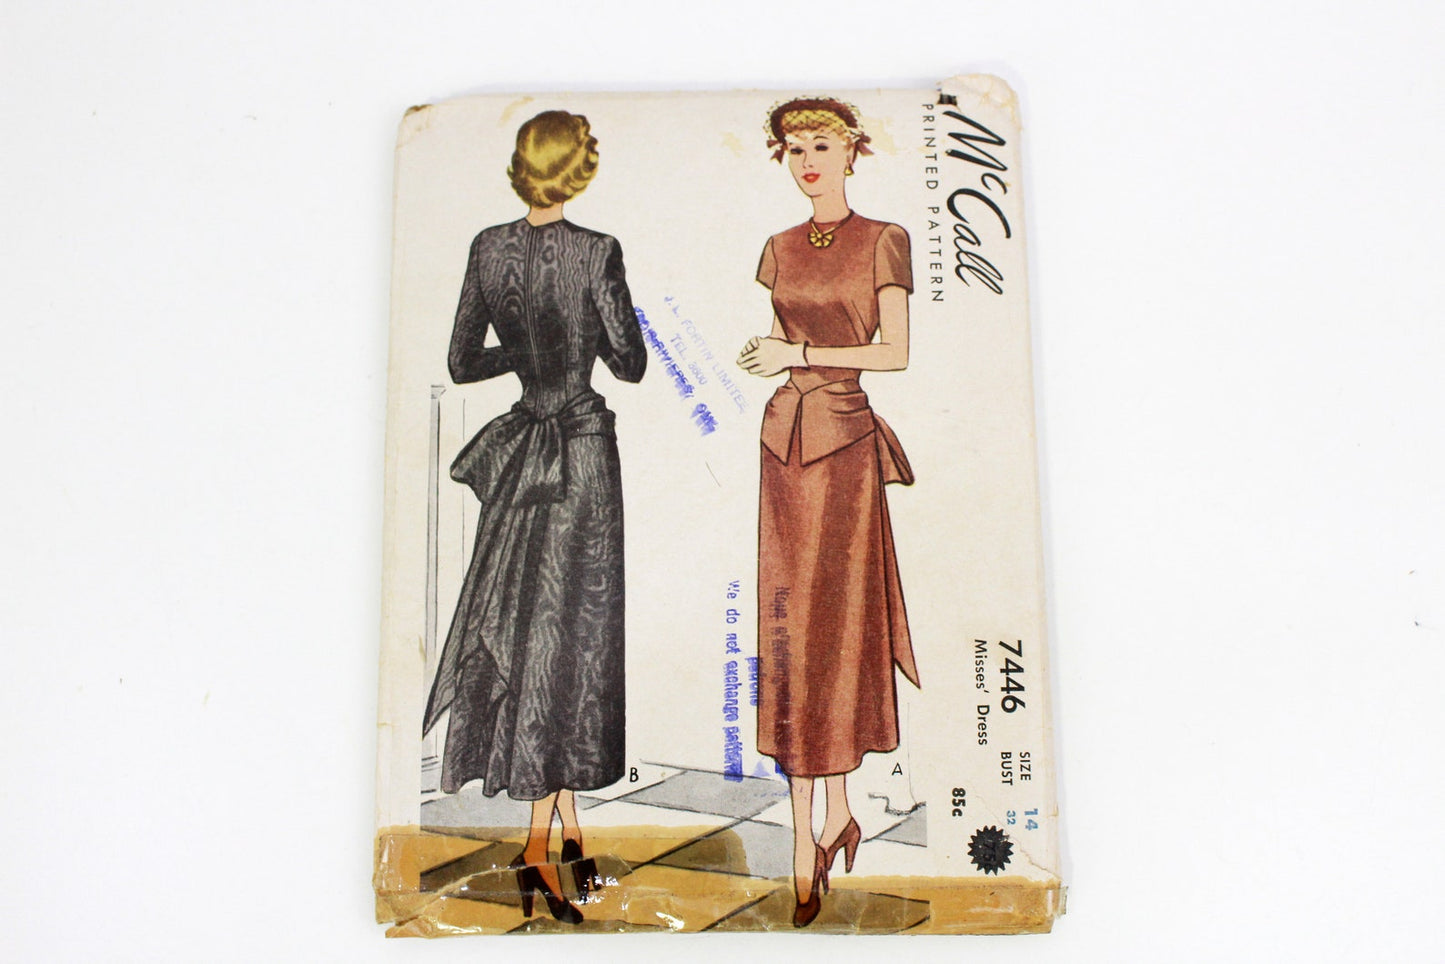 1940s Women's Dress Sewing Pattern McCall 7446, Vintage Sewing Pattern, Bust 32 in., Complete